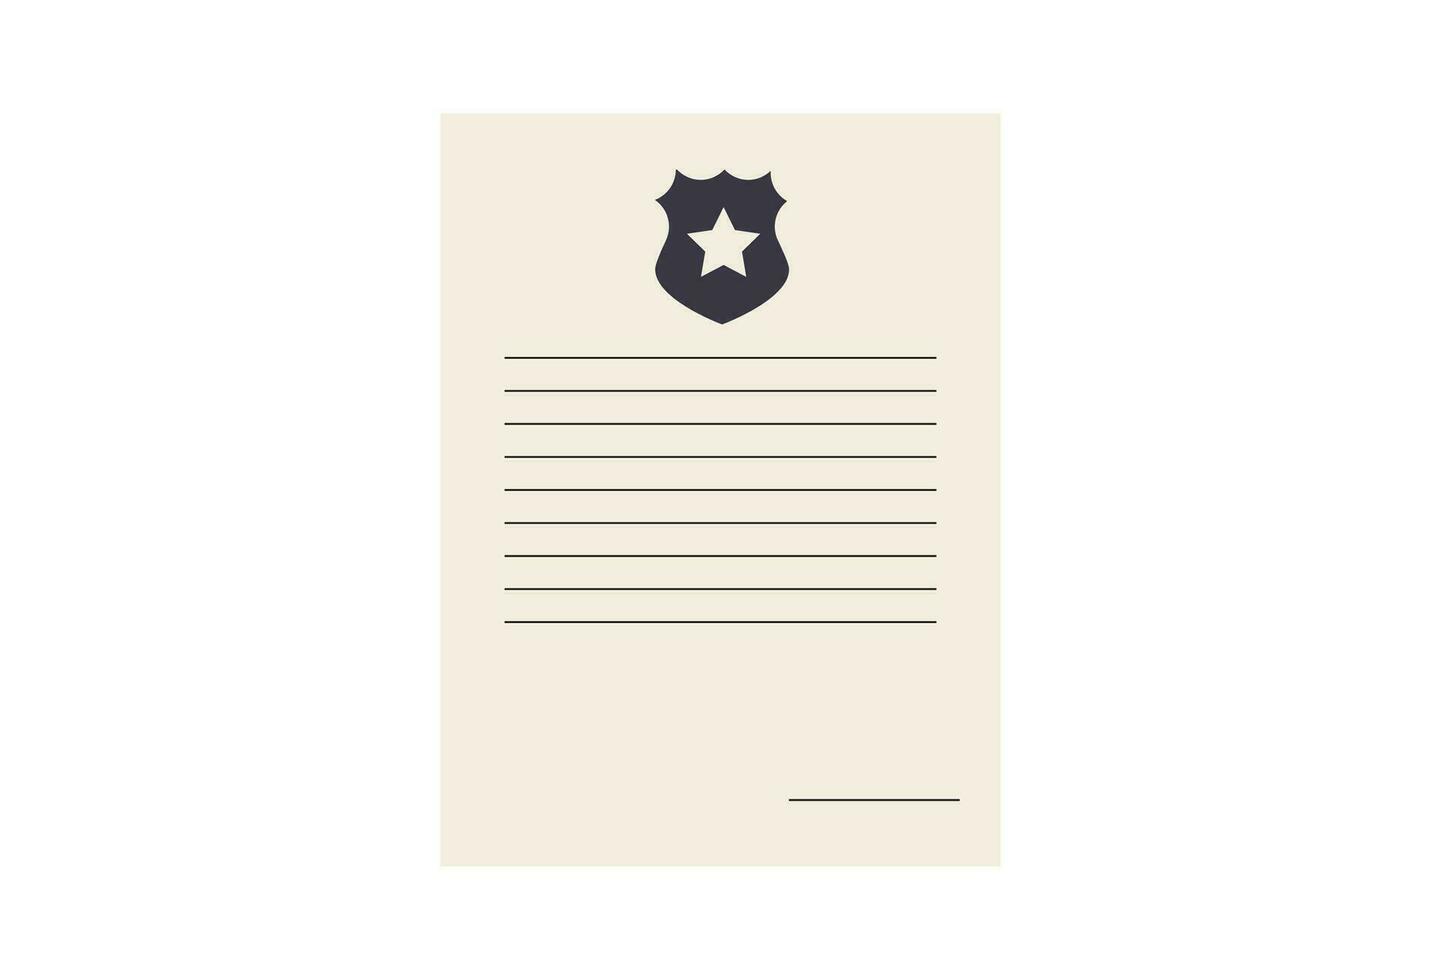 police assignment icon, is a vector illustration, very simple and minimalistic. With this police assignment icon you can use it for various needs. Whether for assignment needs or visual investigation